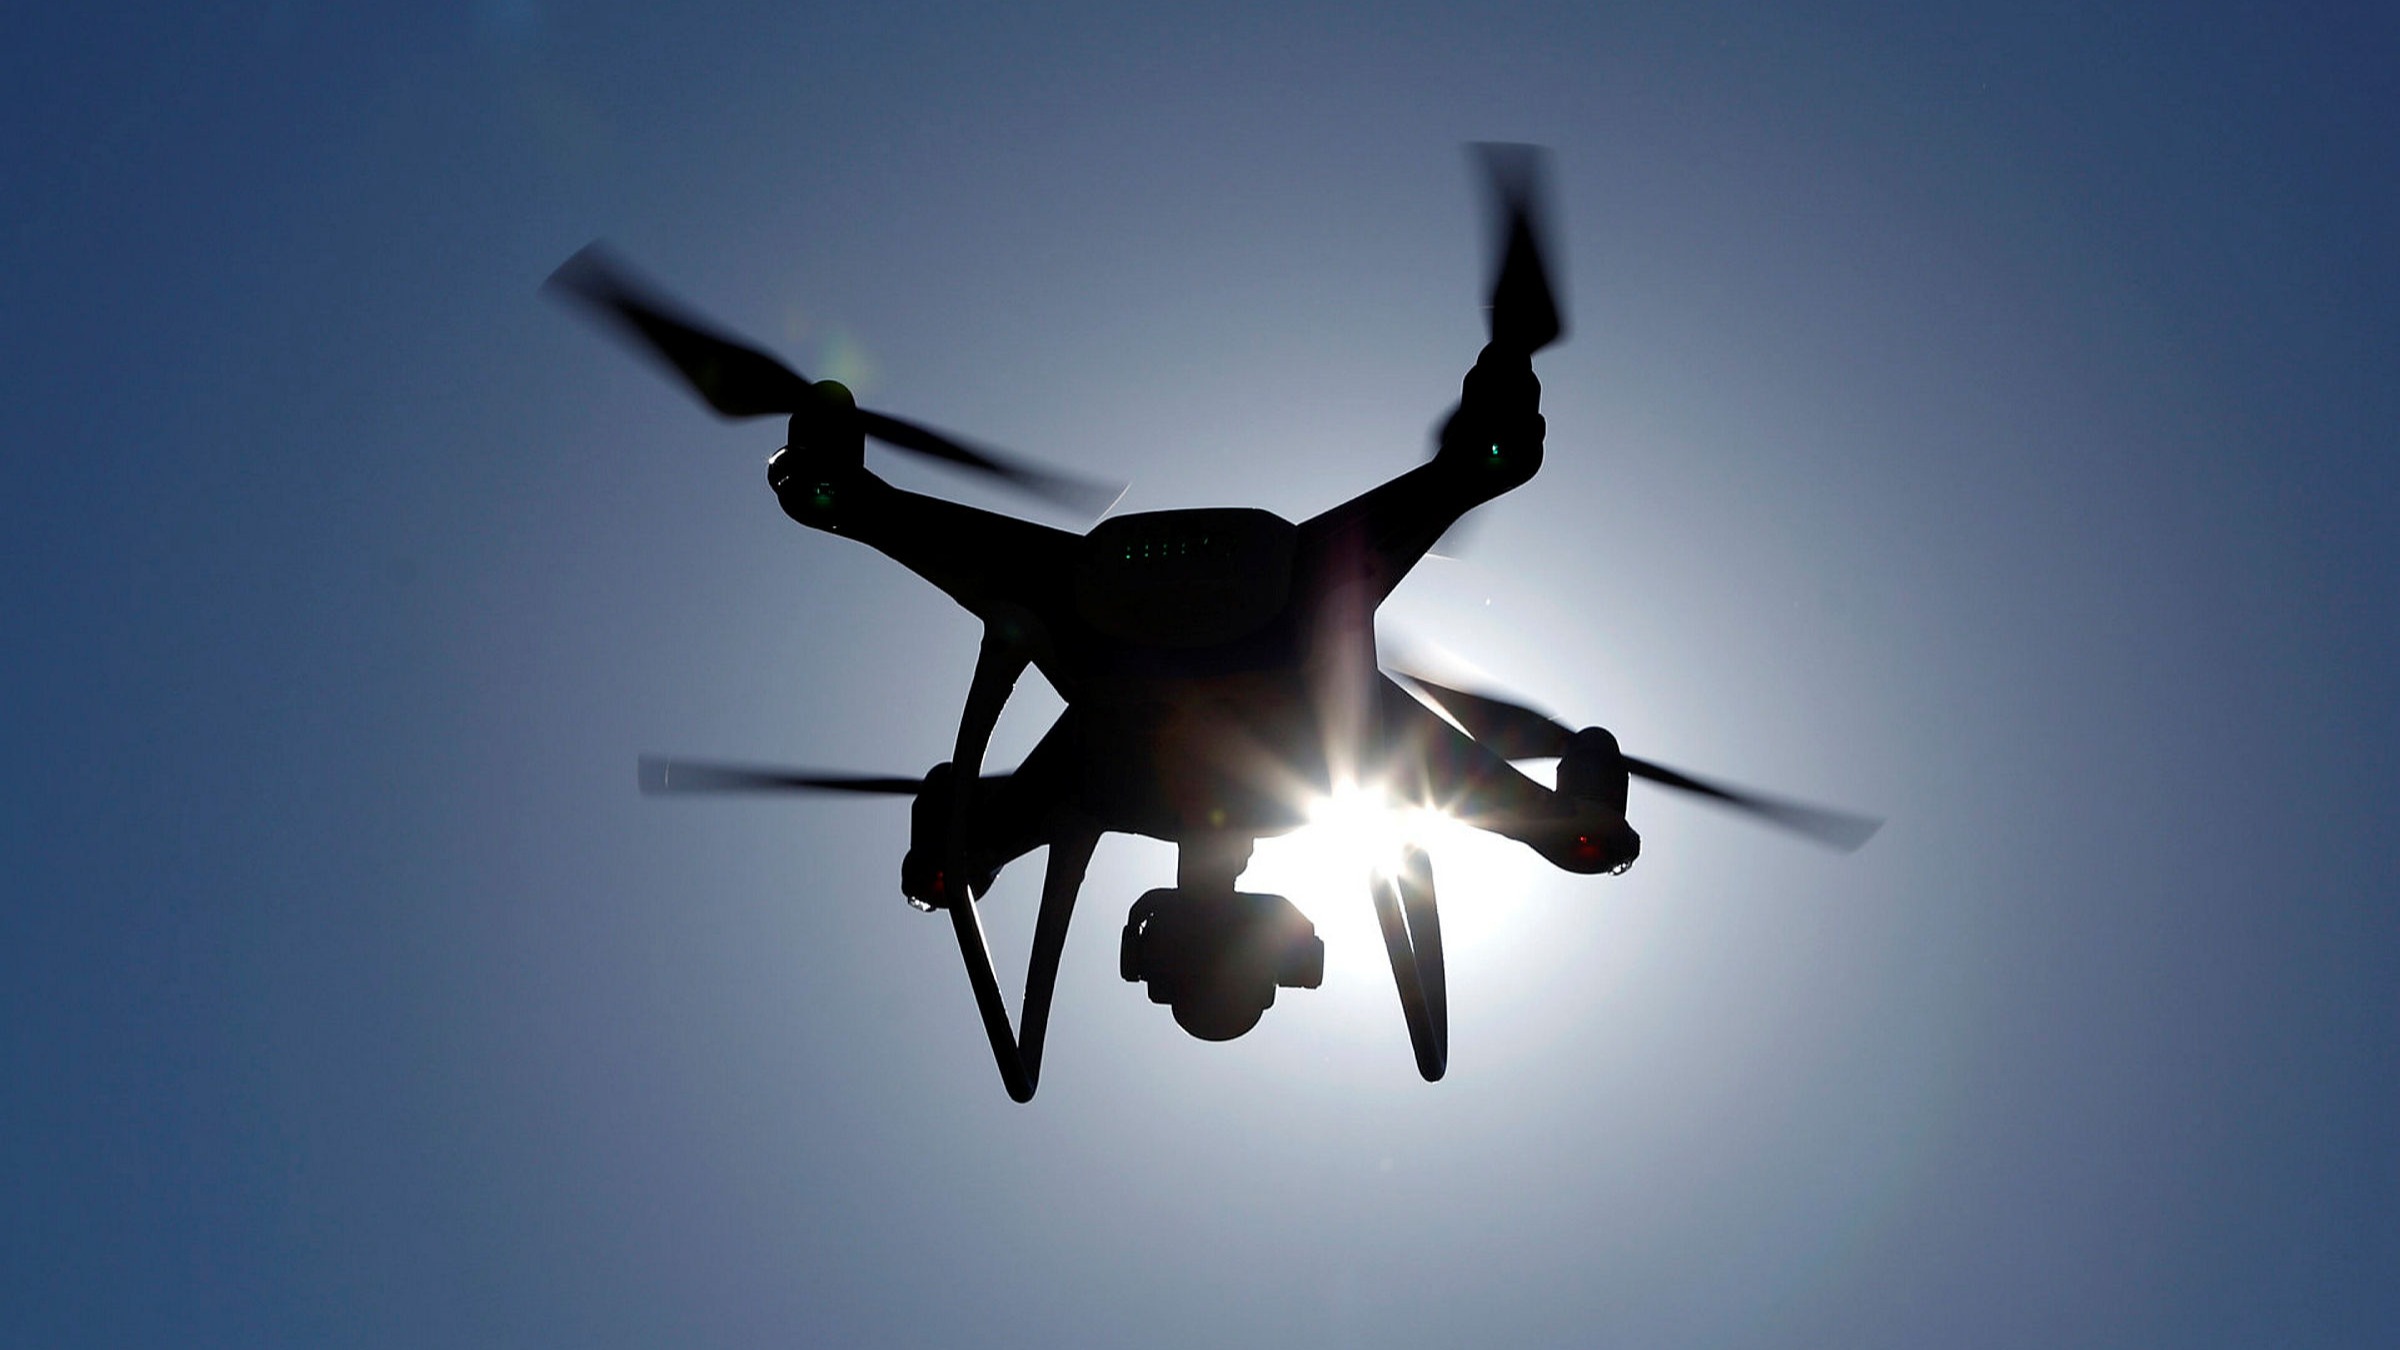 Maryland Law Enforcement Adopts Drones from a Chinese Company Blacklisted in Four States